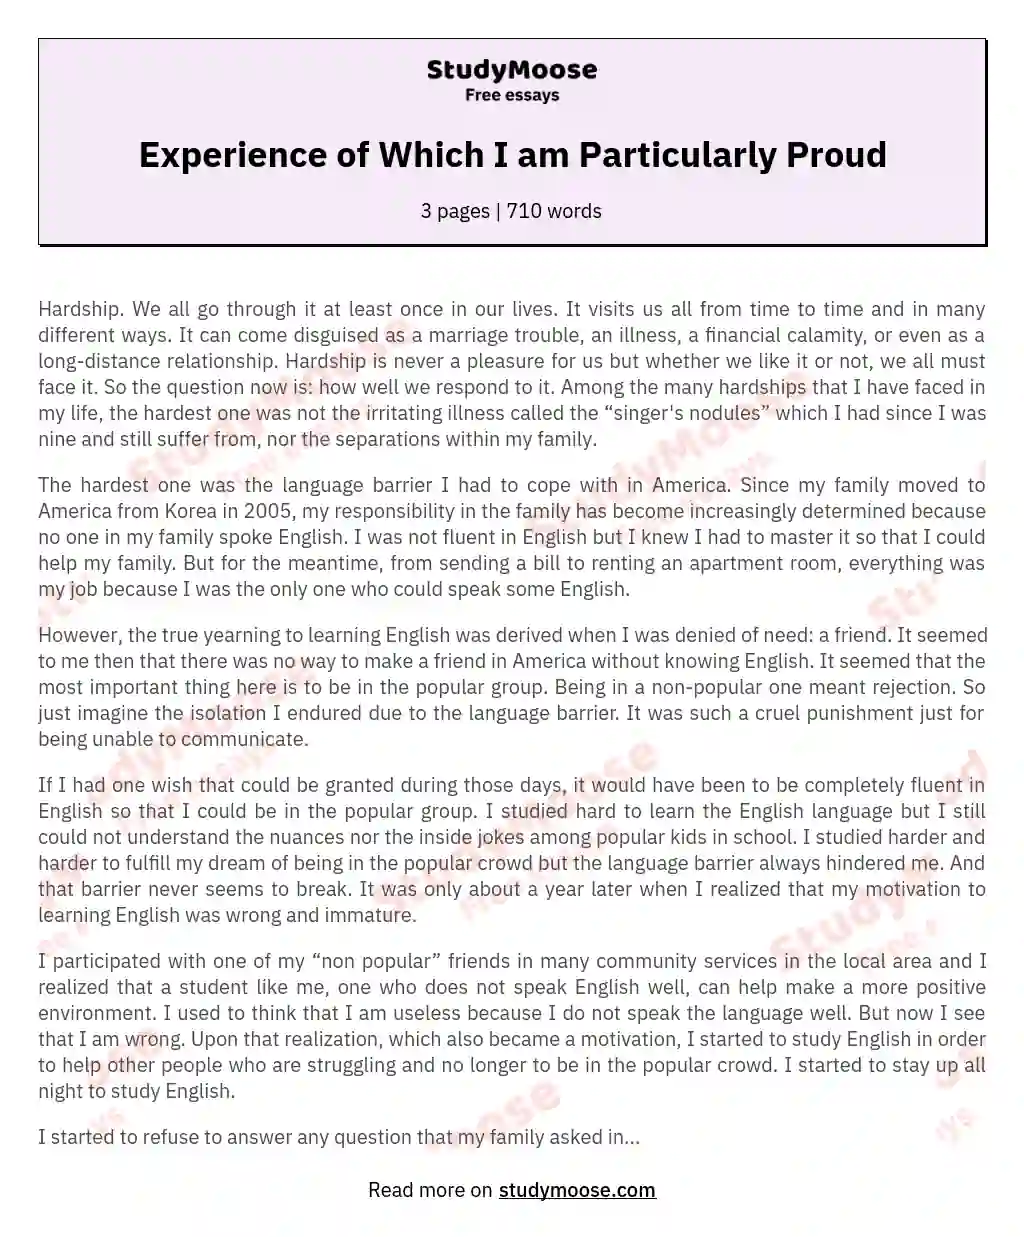 Experience of Which I am Particularly Proud essay